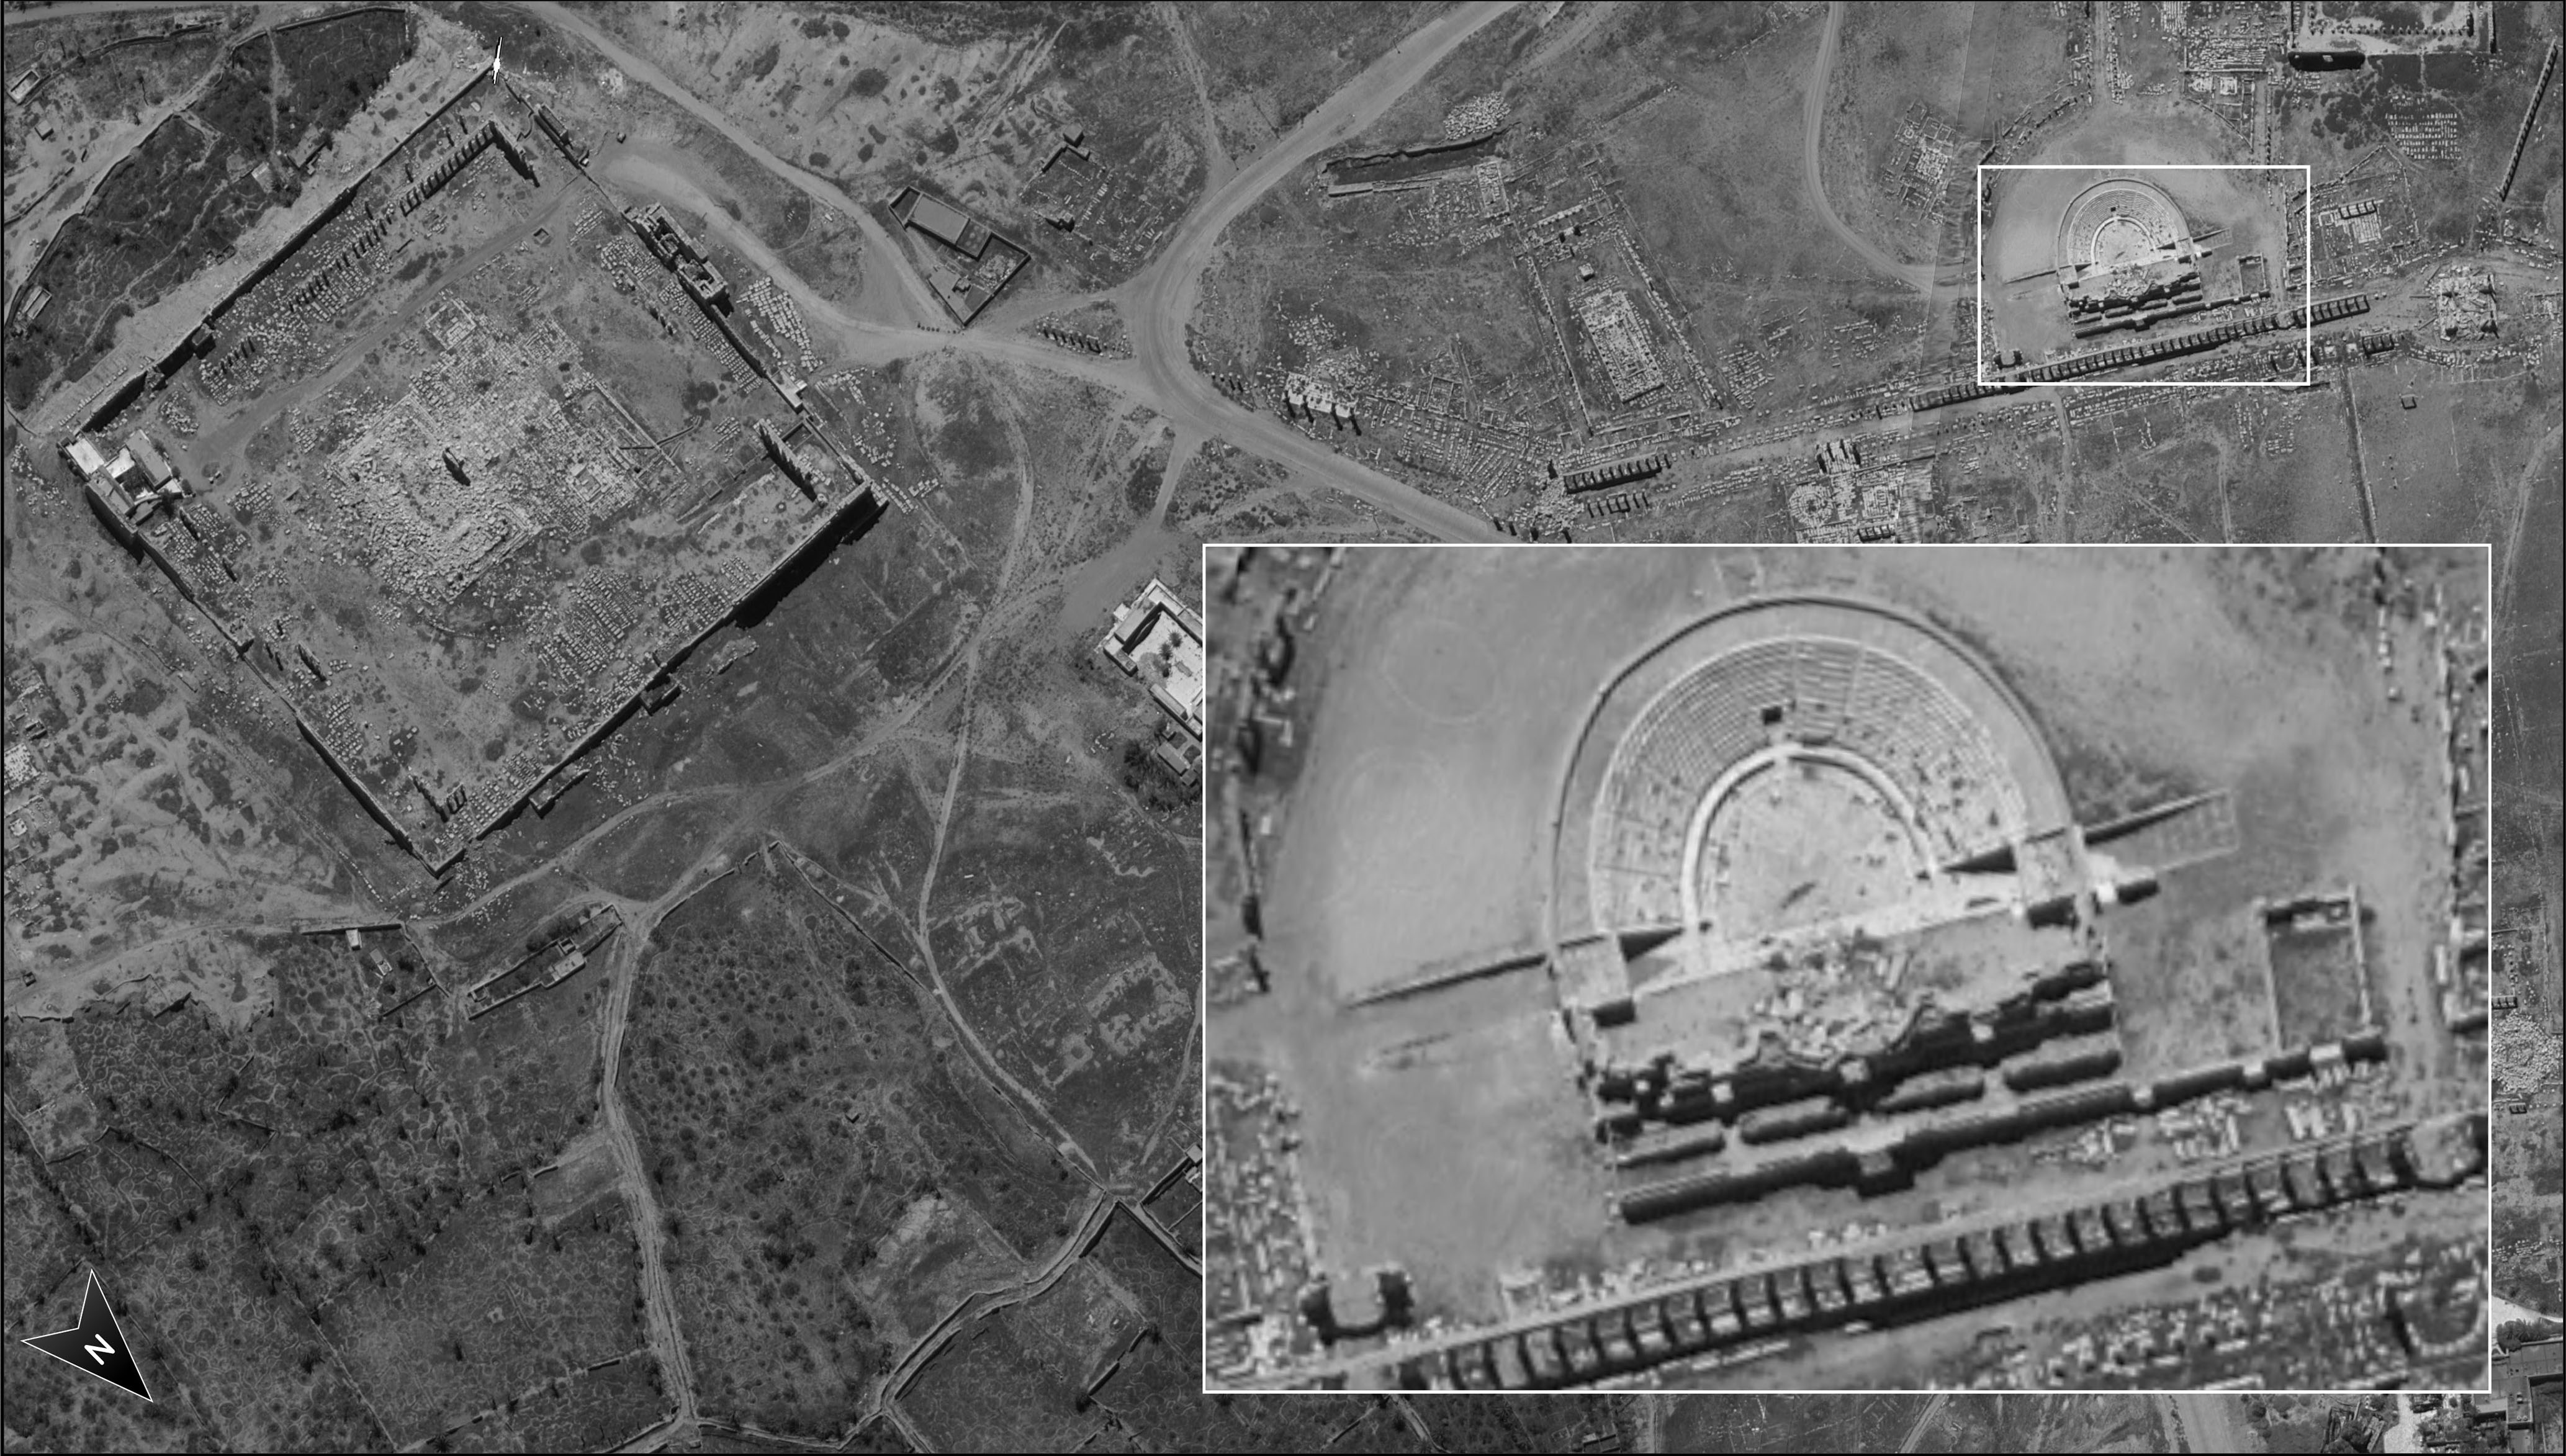 The IMOD said this image of the Temple of Bel and Roman Theatre at Palmyra was taken by the Ofek 16 satellite that was launched on 6 July. (Israeli Ministry of Defense)